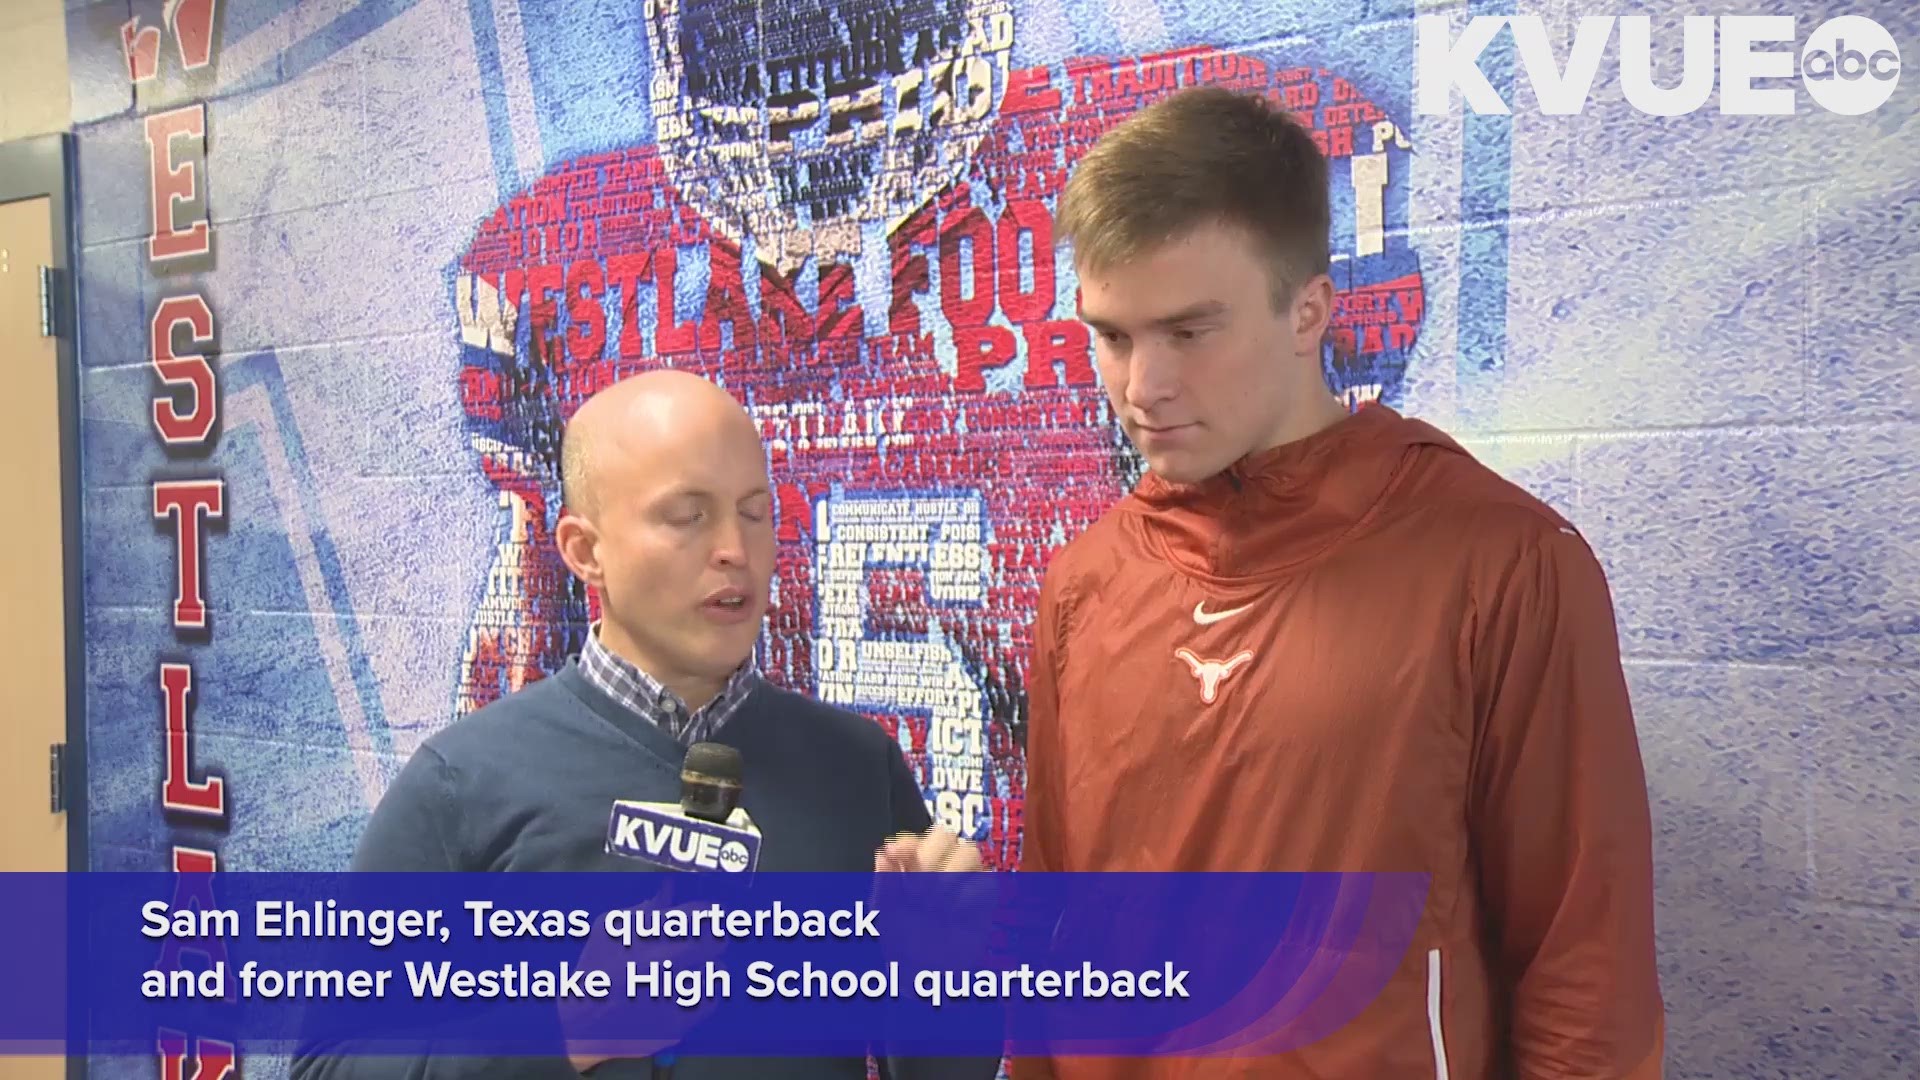 Sam Ehlinger, Texas Longhorns’ quarterback and former Westlake High School quarterback, talked with KVUE’s Shawn Clynch about the connection he shares with Drew Brees and Nick Foles: They all played for the same high school in Austin.